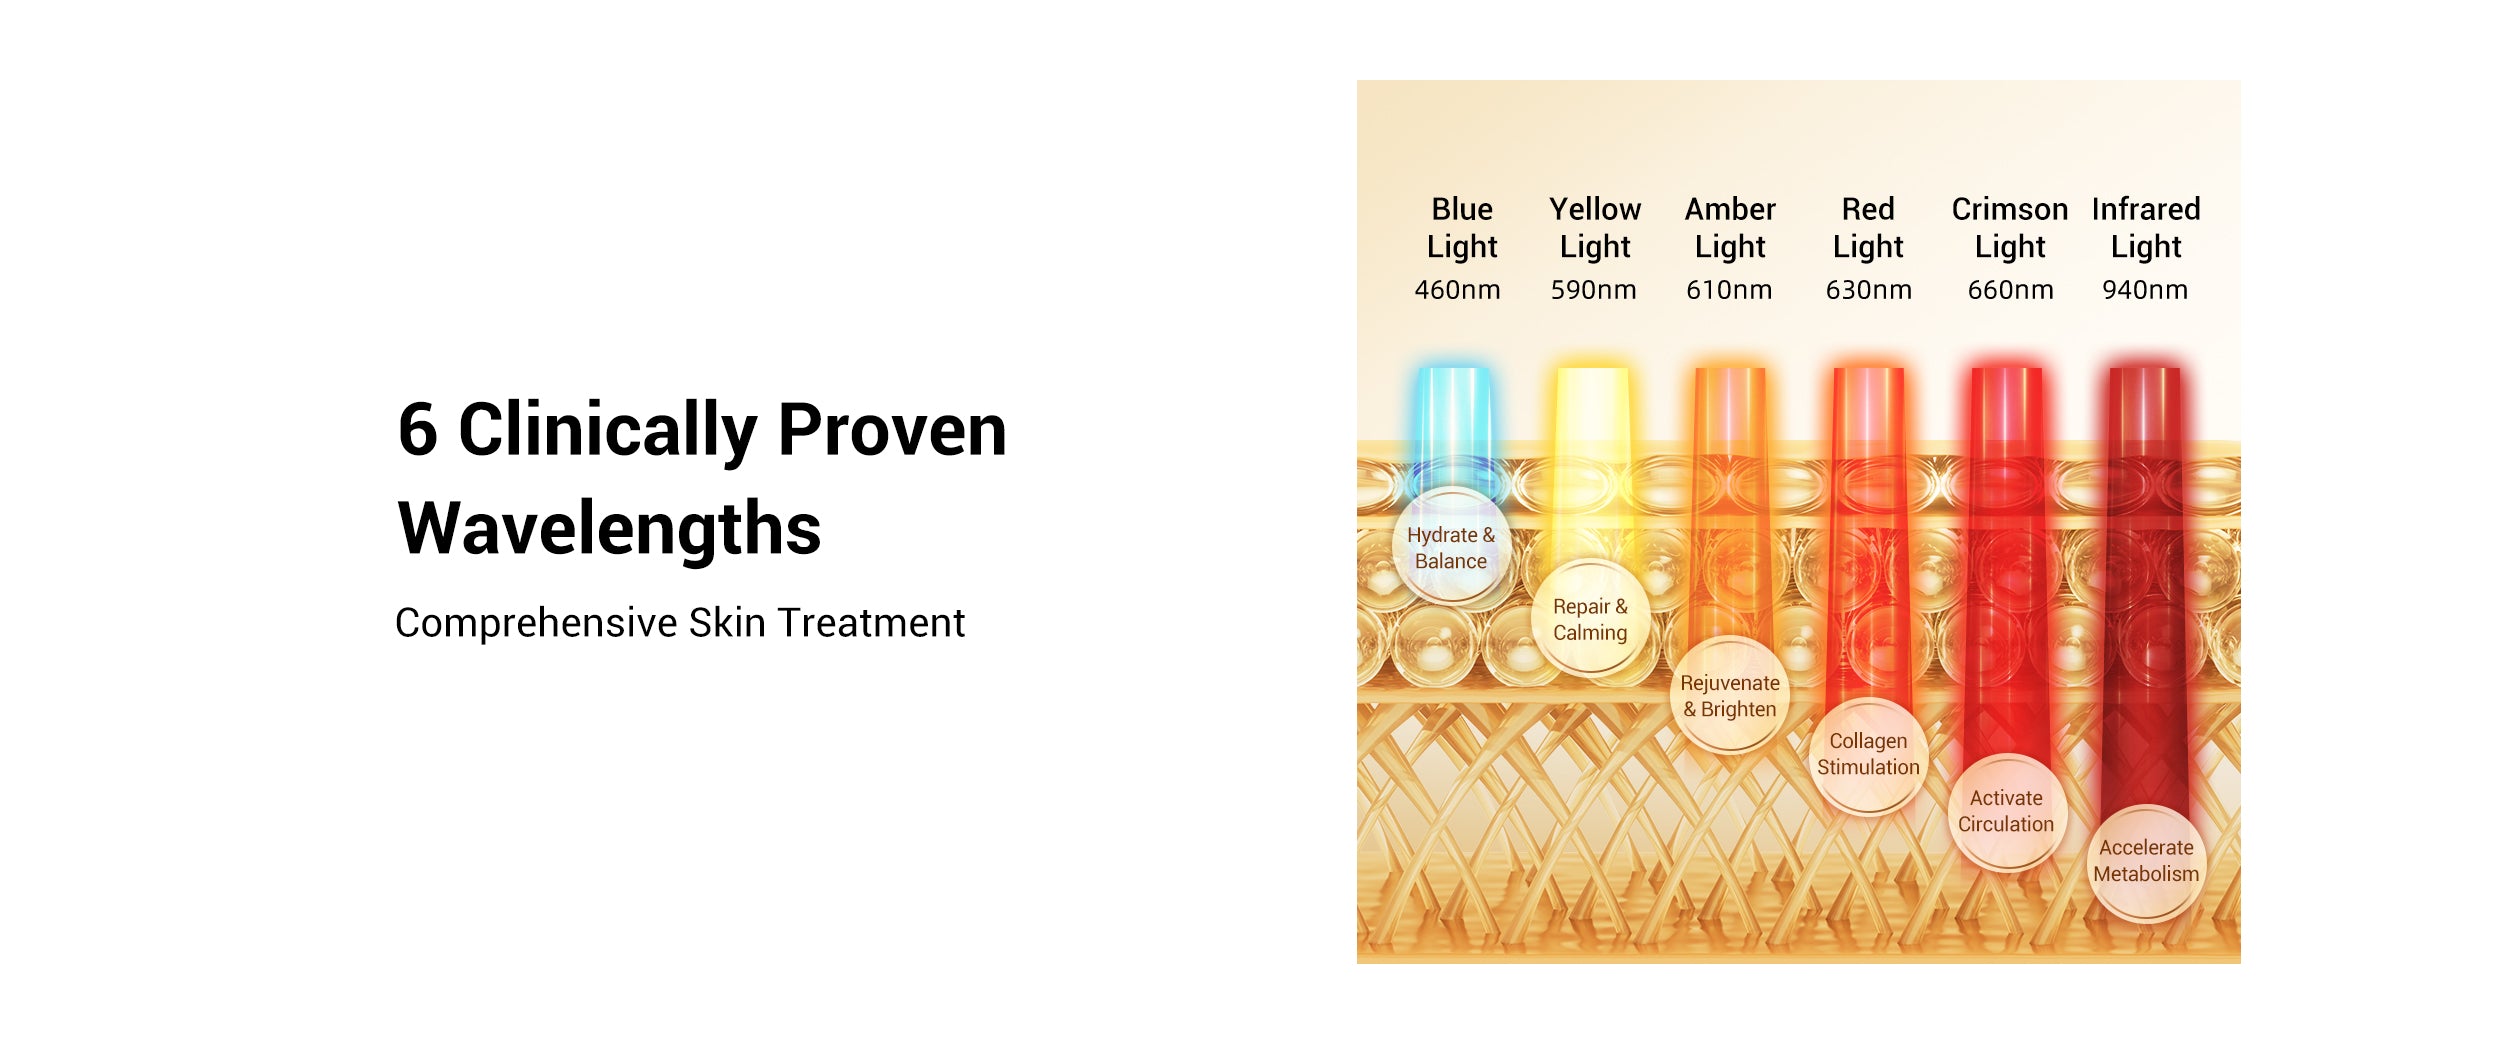 Six clinically proven wavelengths of LED light for comprehensive skin treatment, including blue, yellow, amber, red, crimson, and infrared lights.